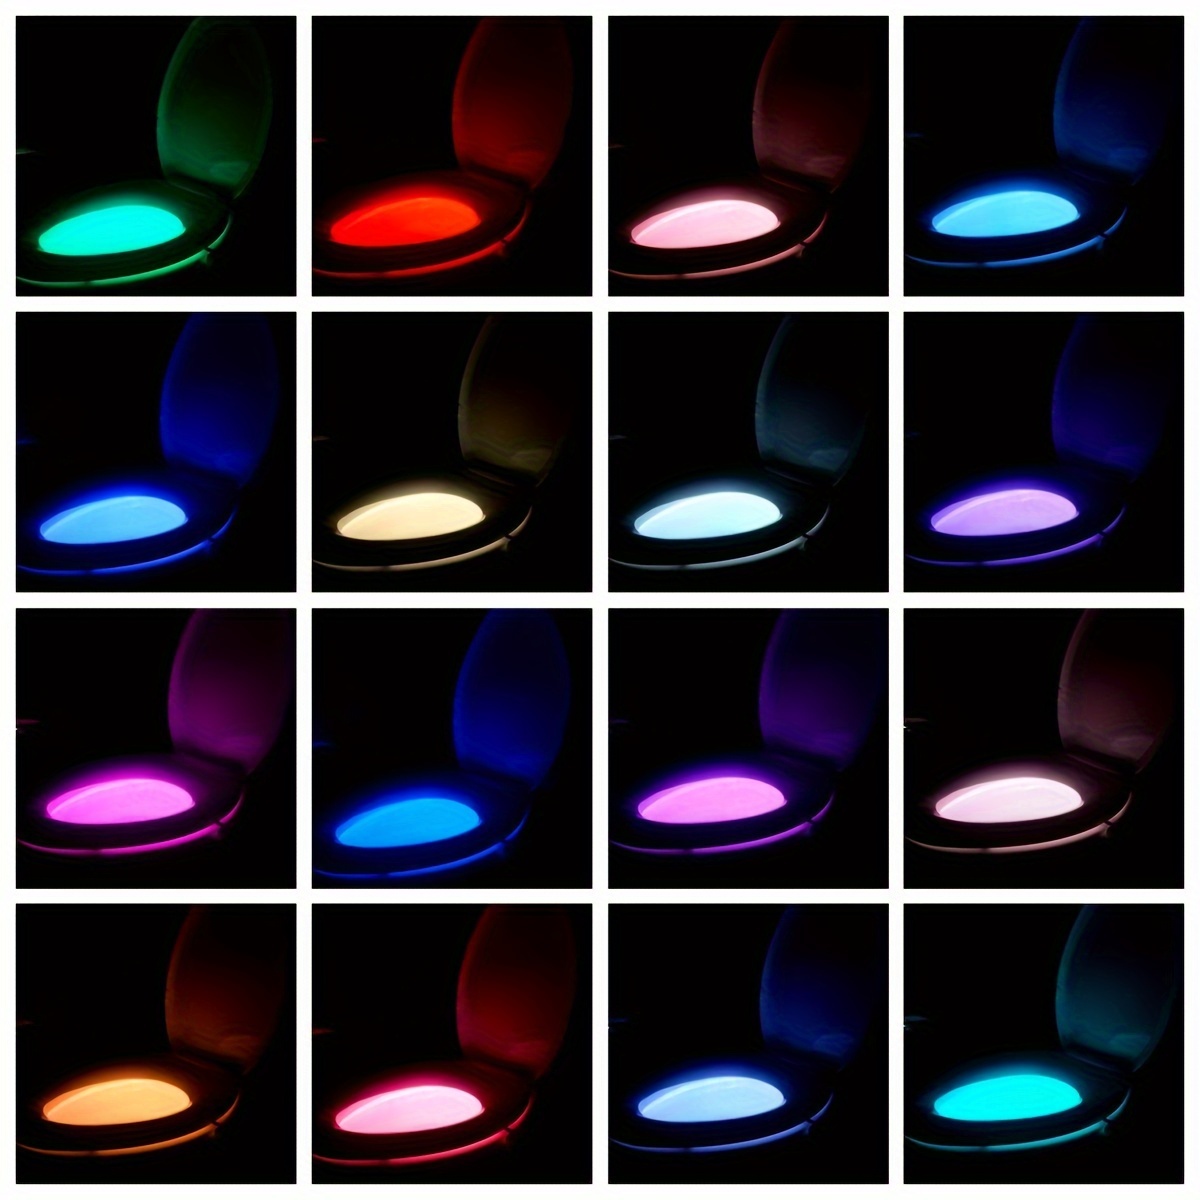 Up To 68% Off on 8 Colors LED Toilet Night Lig